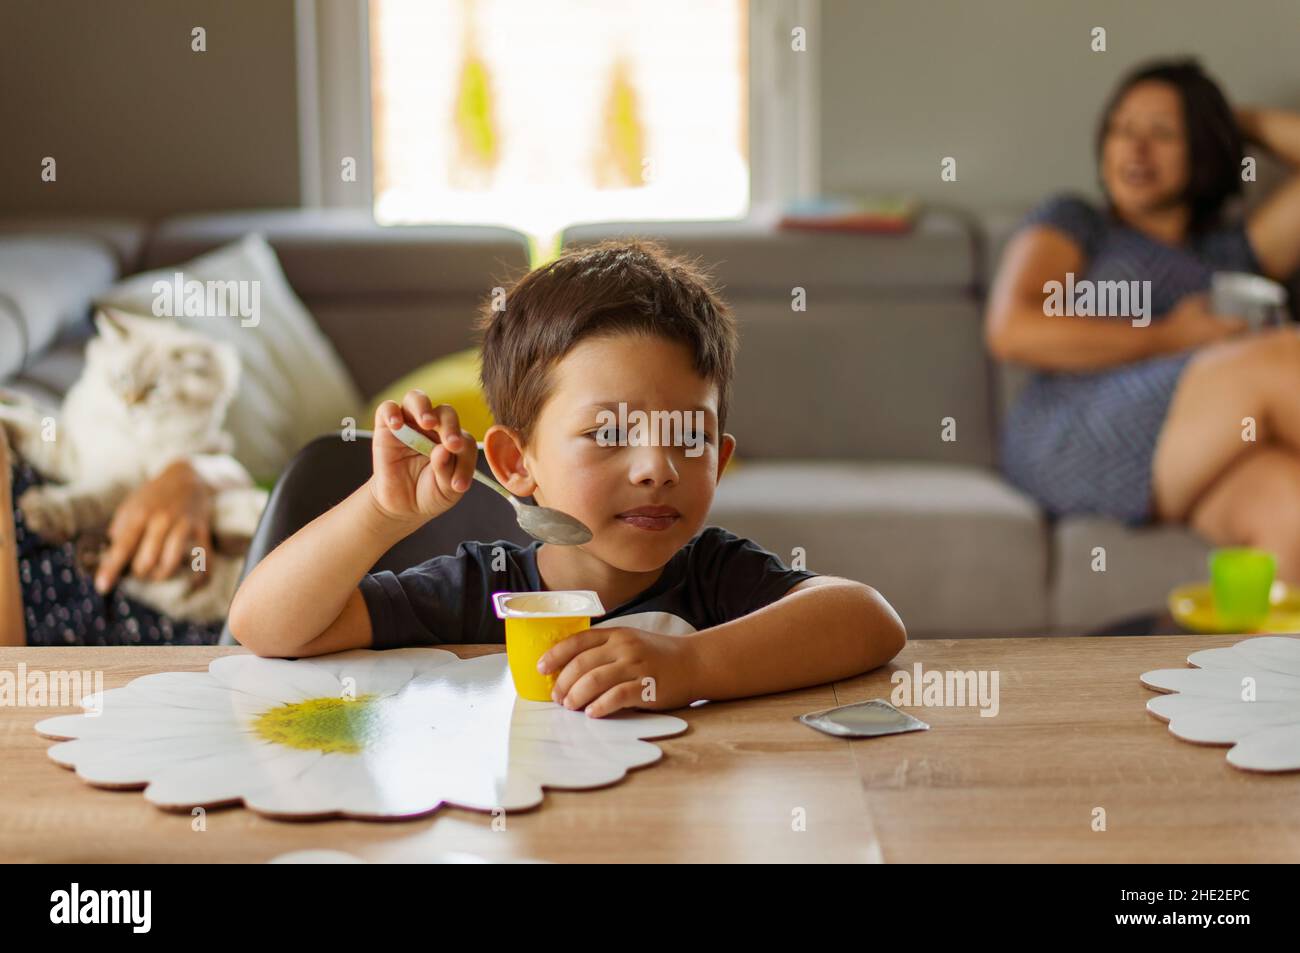 Closeup shot of a young boy eating a yogurt with his mother sitting on the sofa on a background Stock Photo